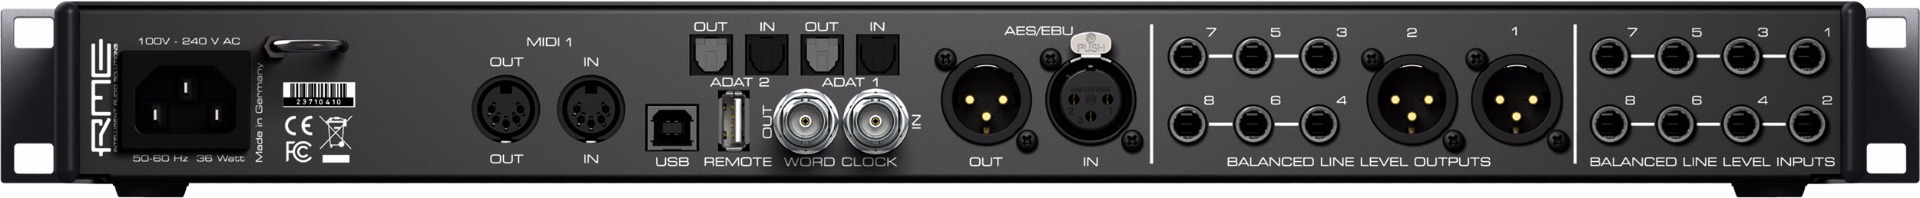 RME Fireface UFX II - USB Flagship Interface